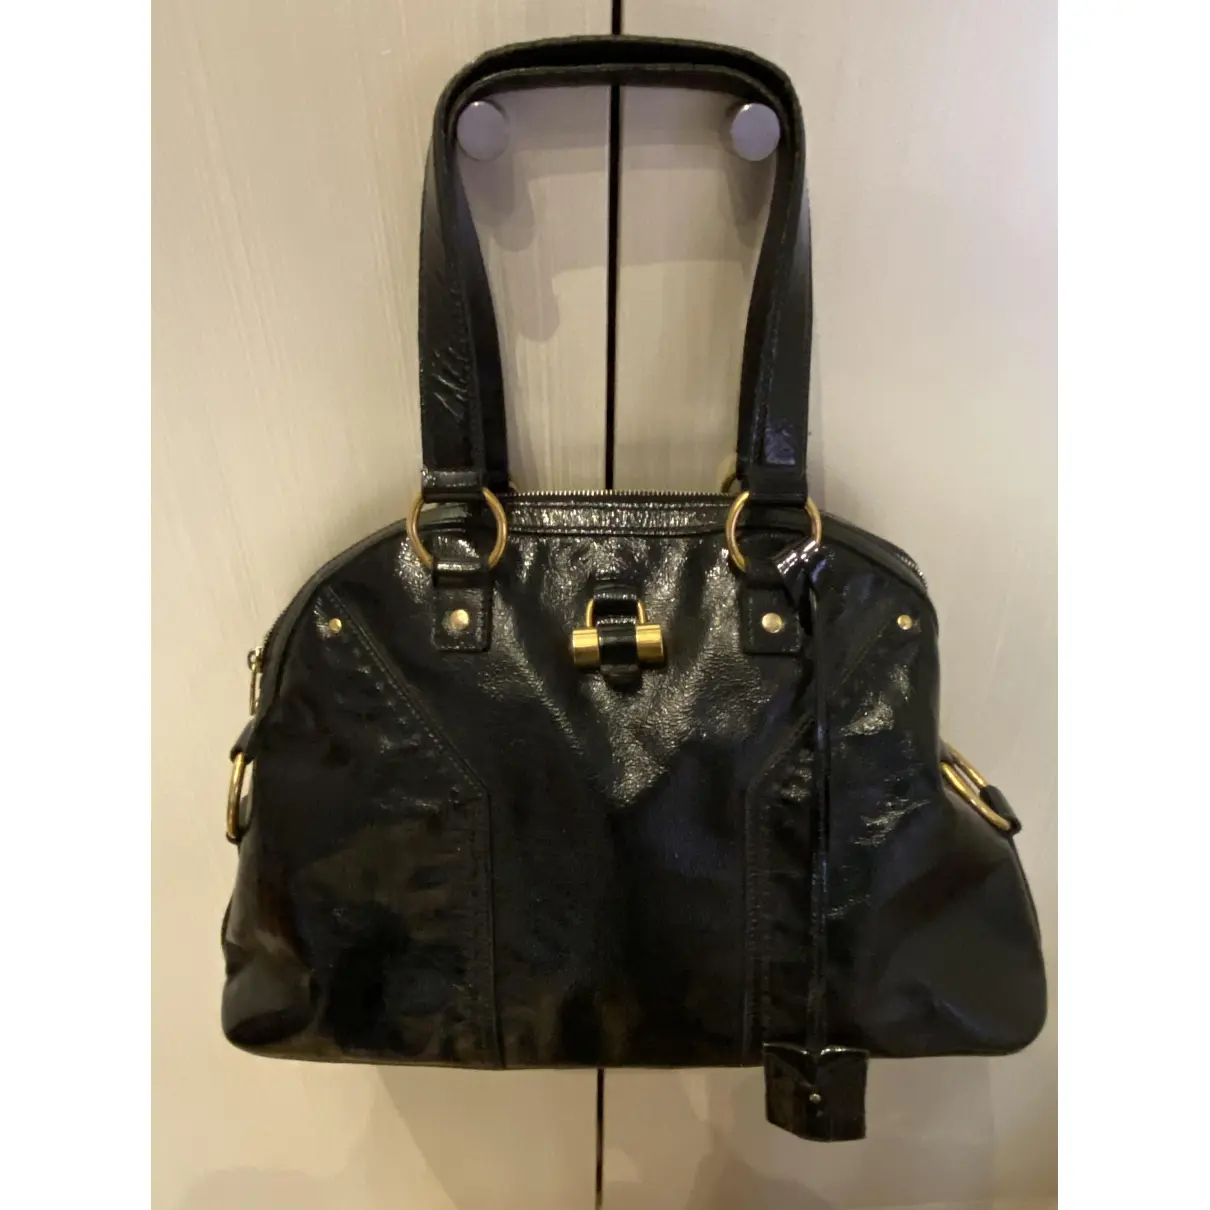 Buy Yves Saint Laurent Patent leather tote online